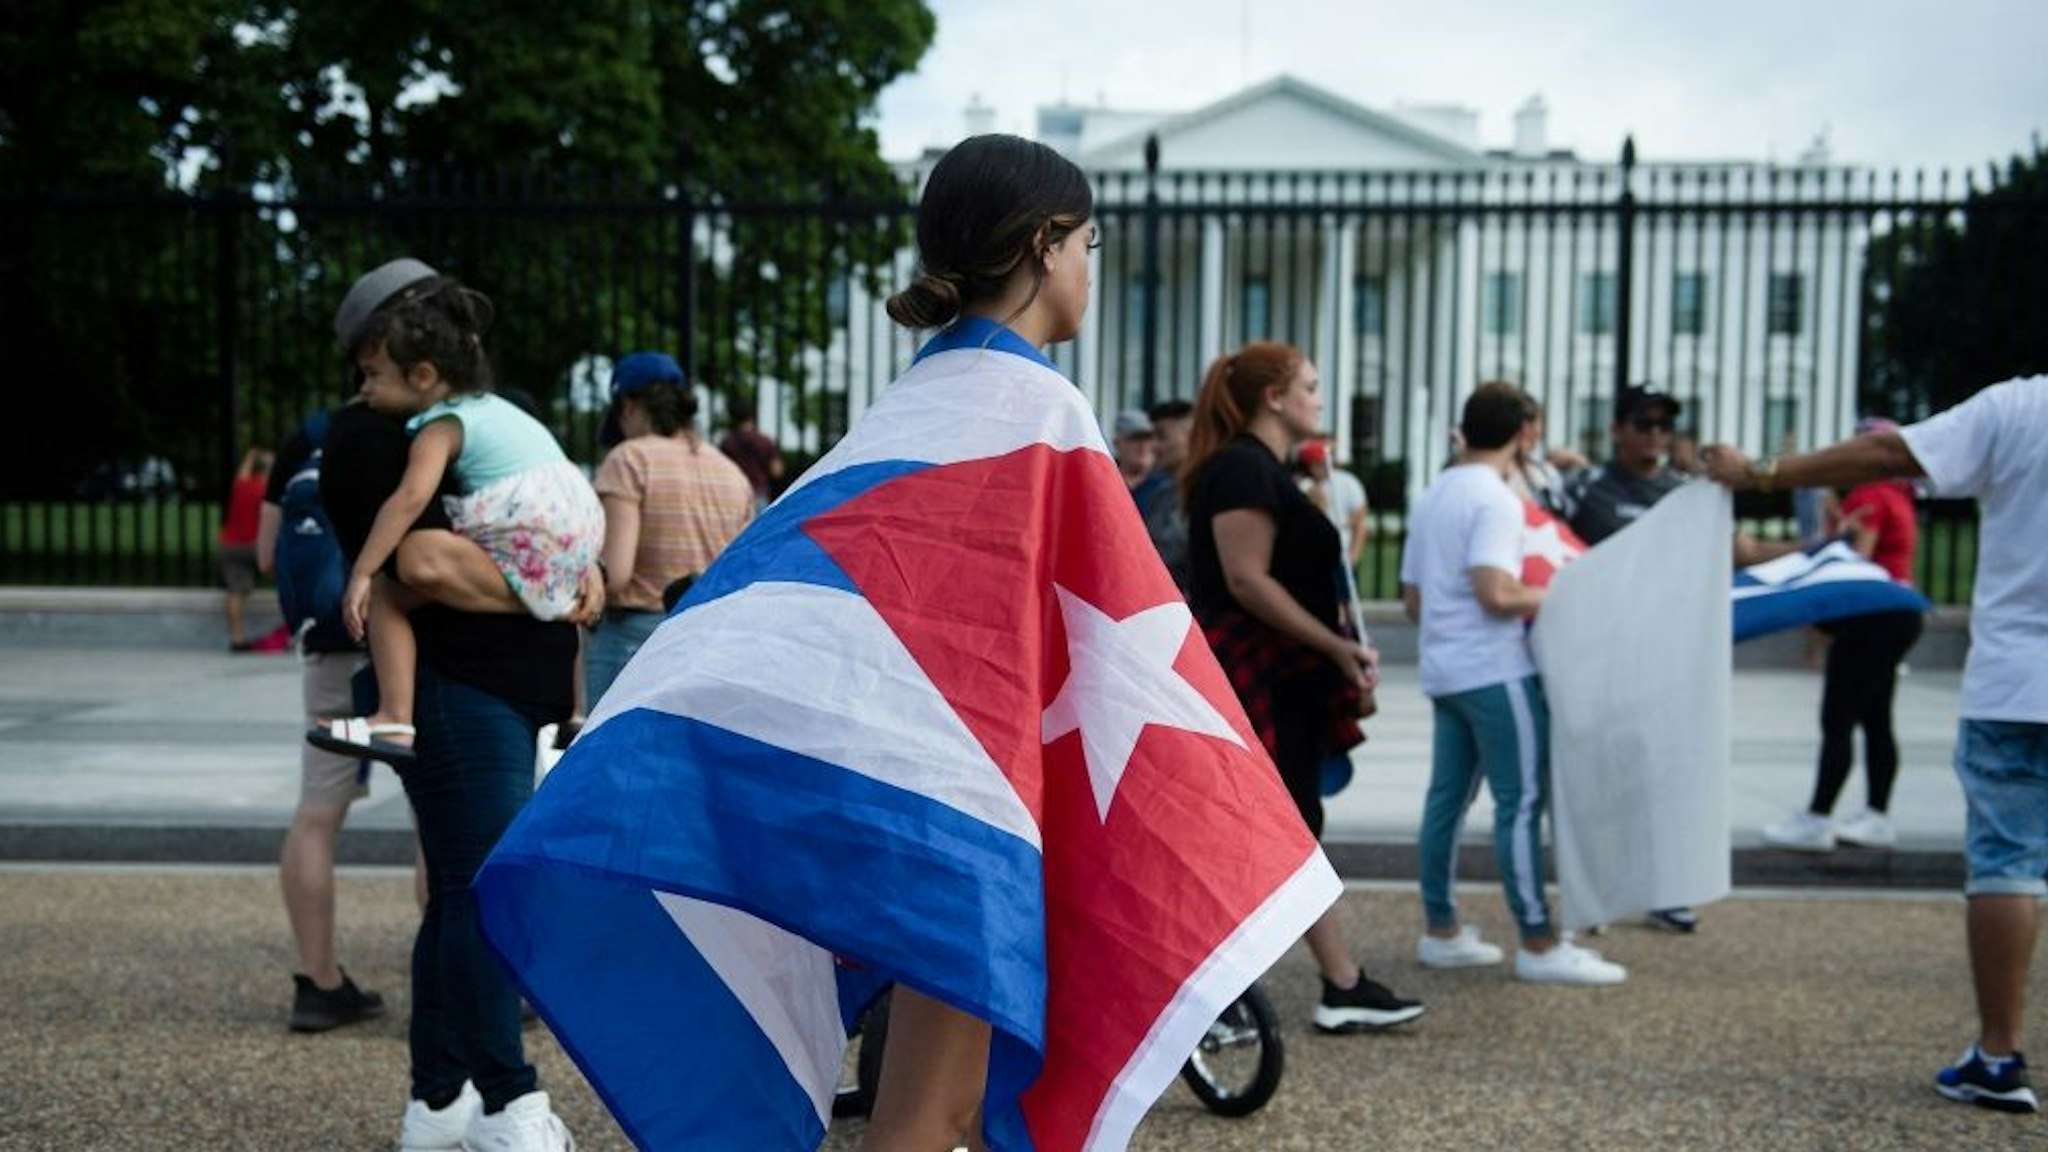 People supporting protests in Cuba gather on Pennsylvania Avenue outside the White House grounds July 13, 2021, in Washington, DC. - Washington warned Haitians and Cubans against trying to flee to the United States as they endure domestic unrest, saying the trip is dangerous and they would be repatriated. (Photo by Brendan Smialowski / AFP) (Photo by